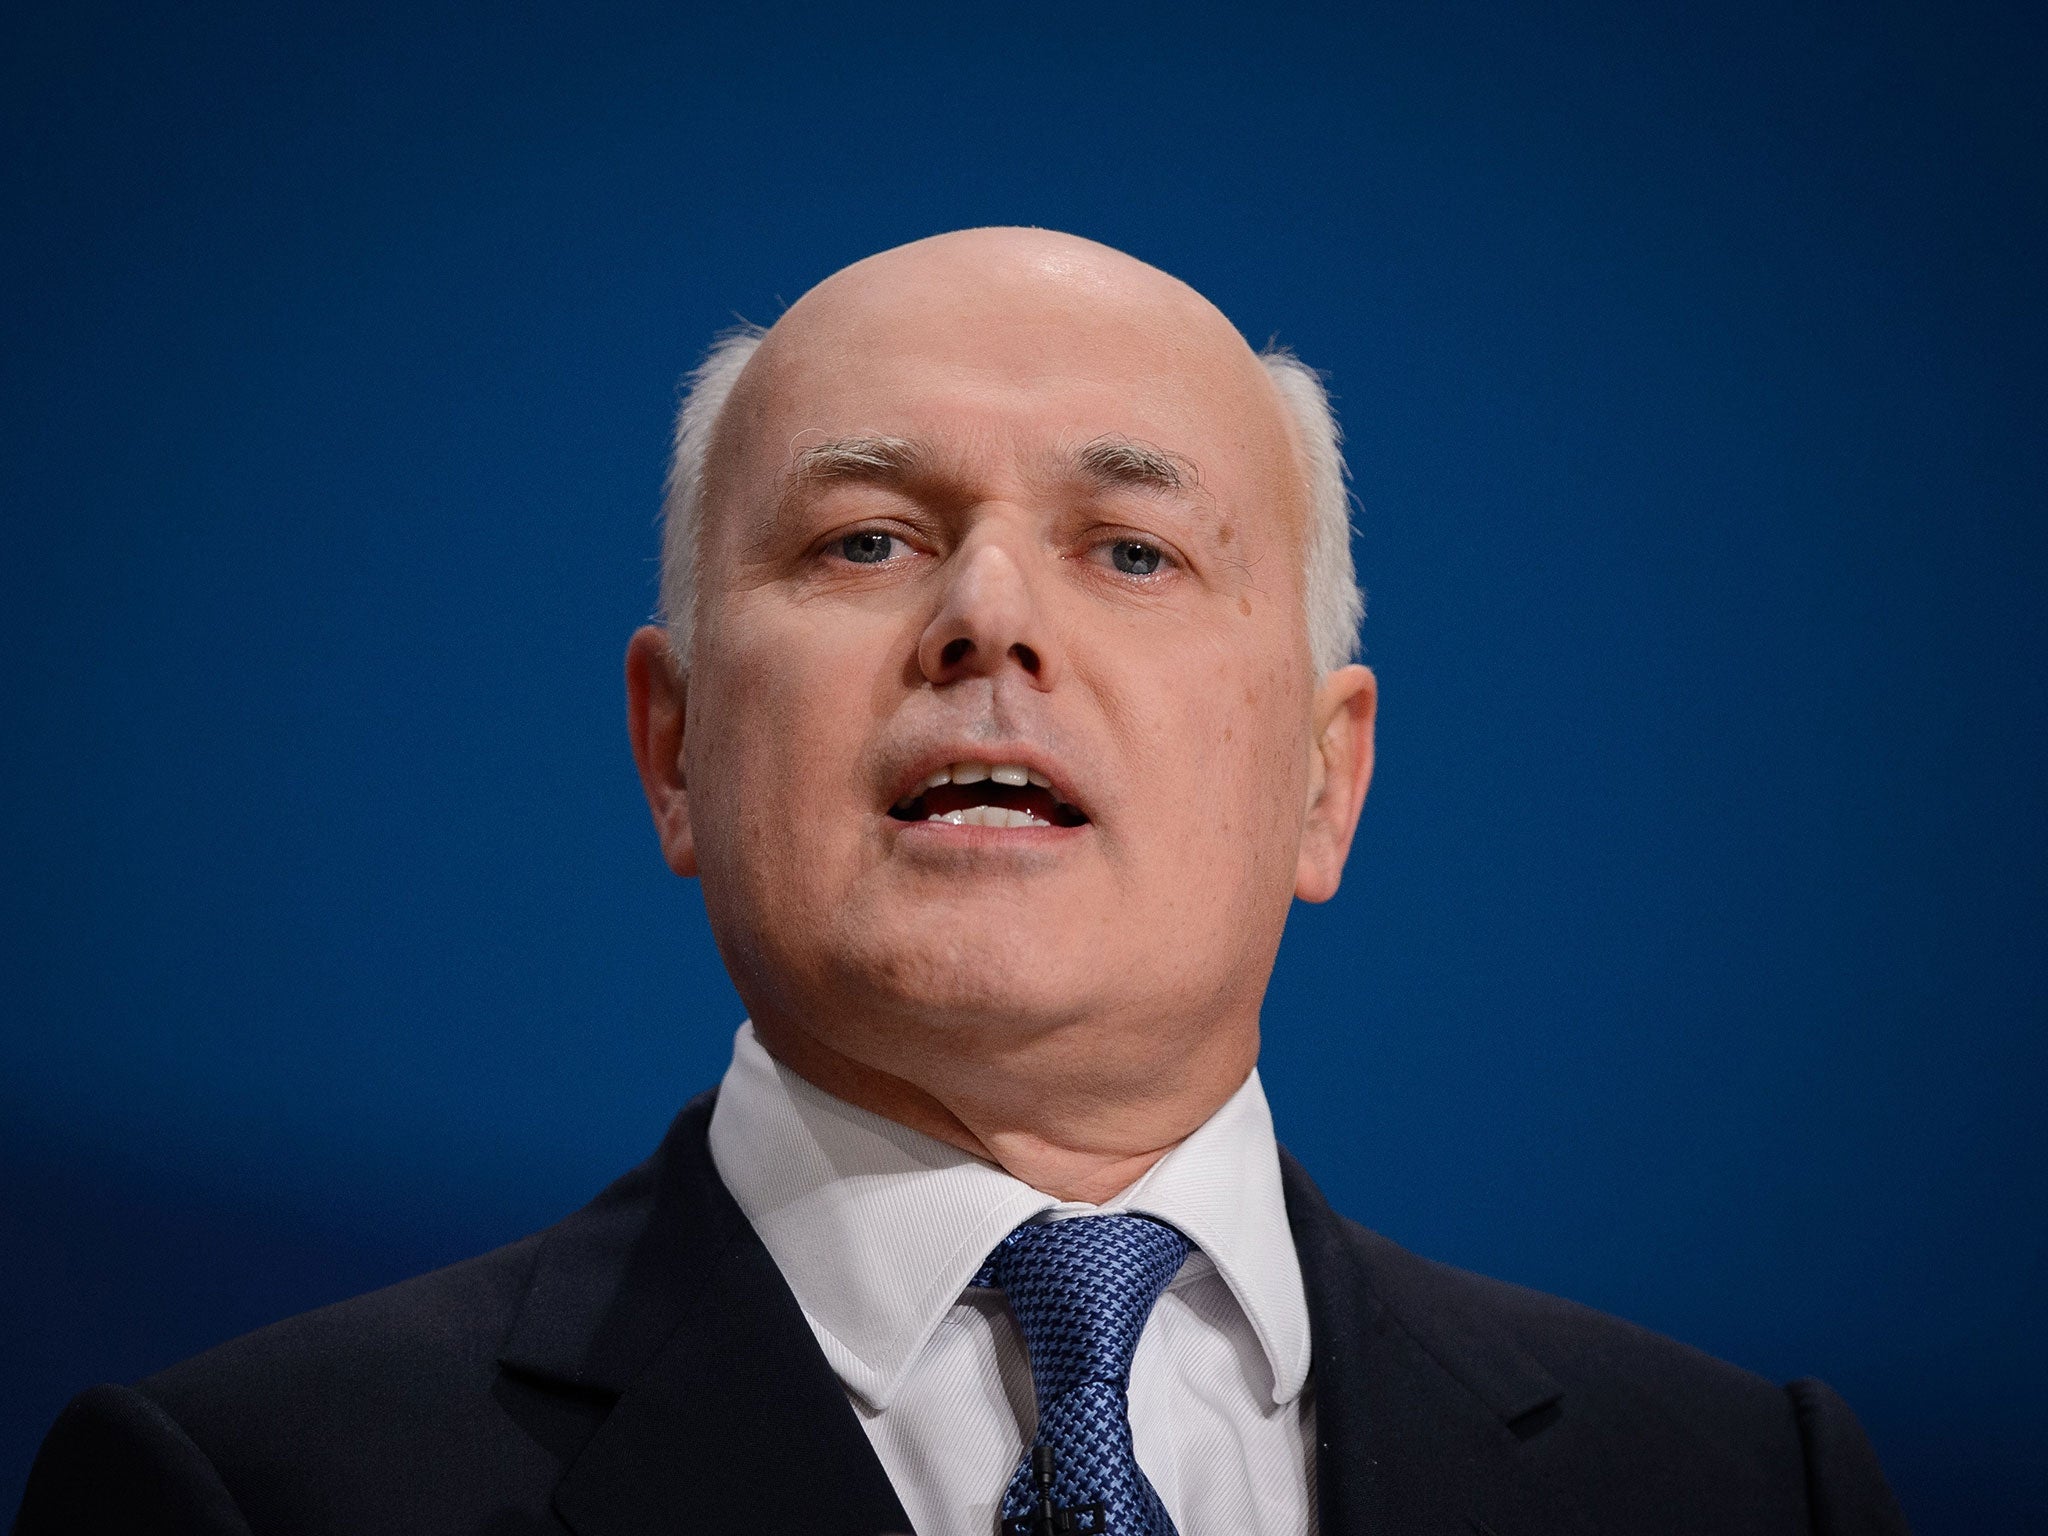 Iain Duncan Smith previously said such figures did not exist